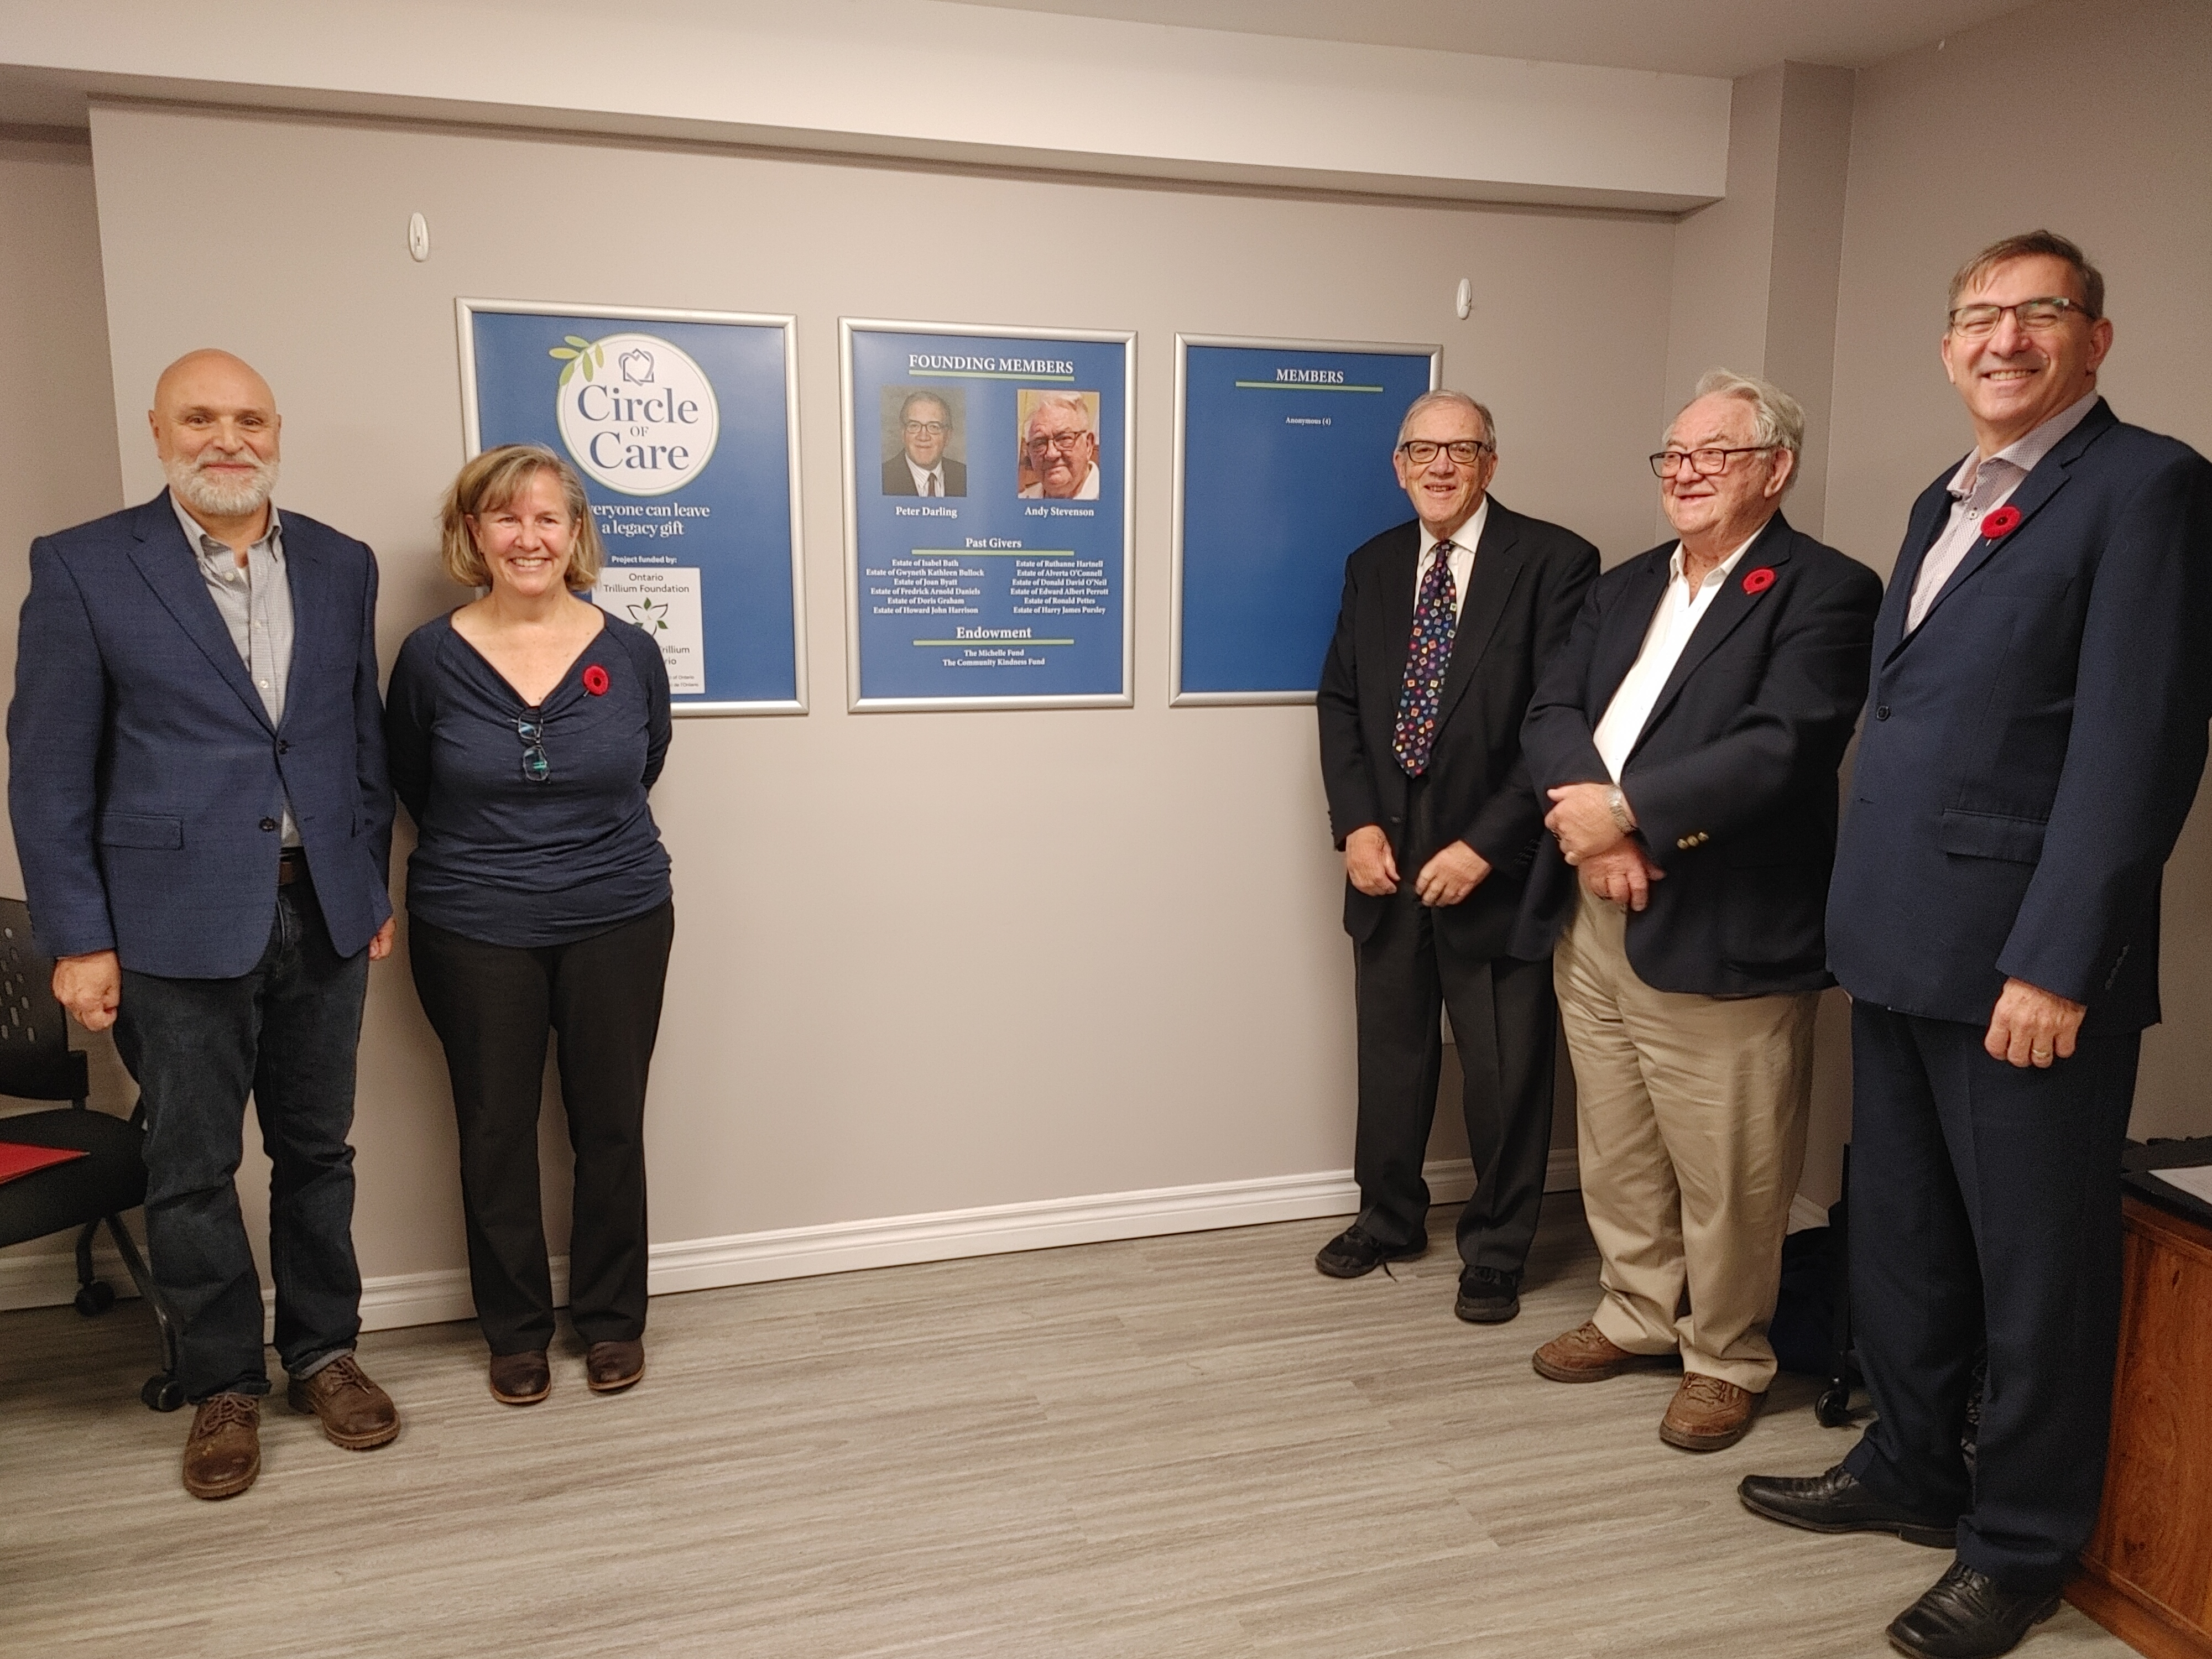 Group picture at launch (left to right) Paul Rosebush - OTF volunteer, Janet Kelly - President CCP Board, Peter Darling and Andy Stevenson - Founding Members of Circle of Care, MPP Dave Smith - Peterborough Kawartha